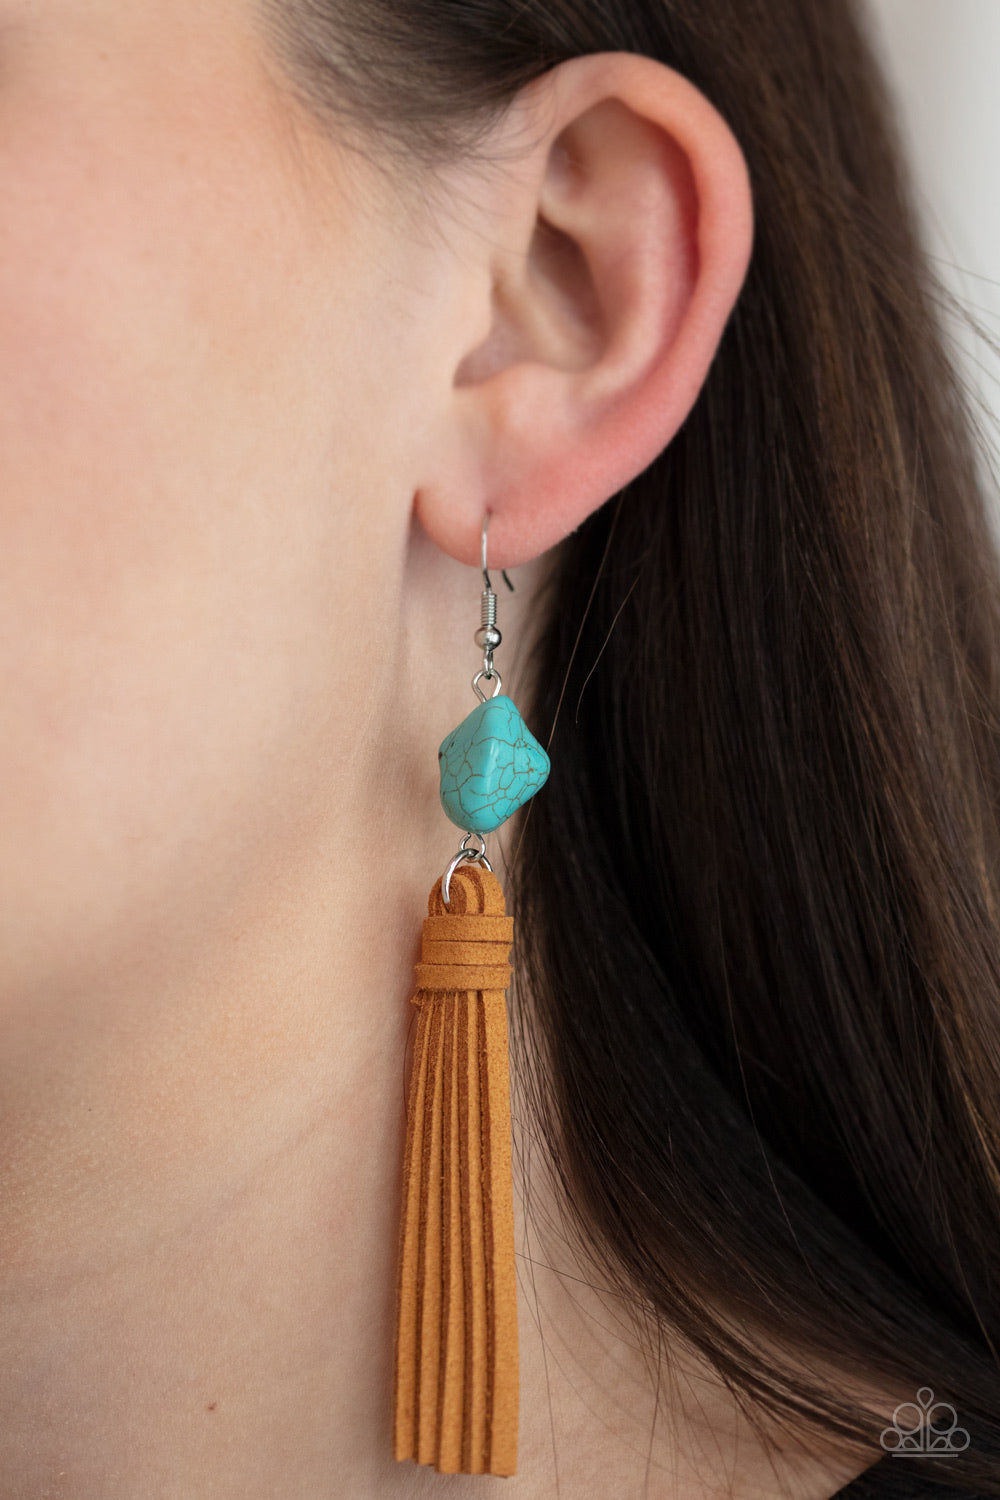 Paparazzi Jewelry Earrings All-Natural Allure - Blue